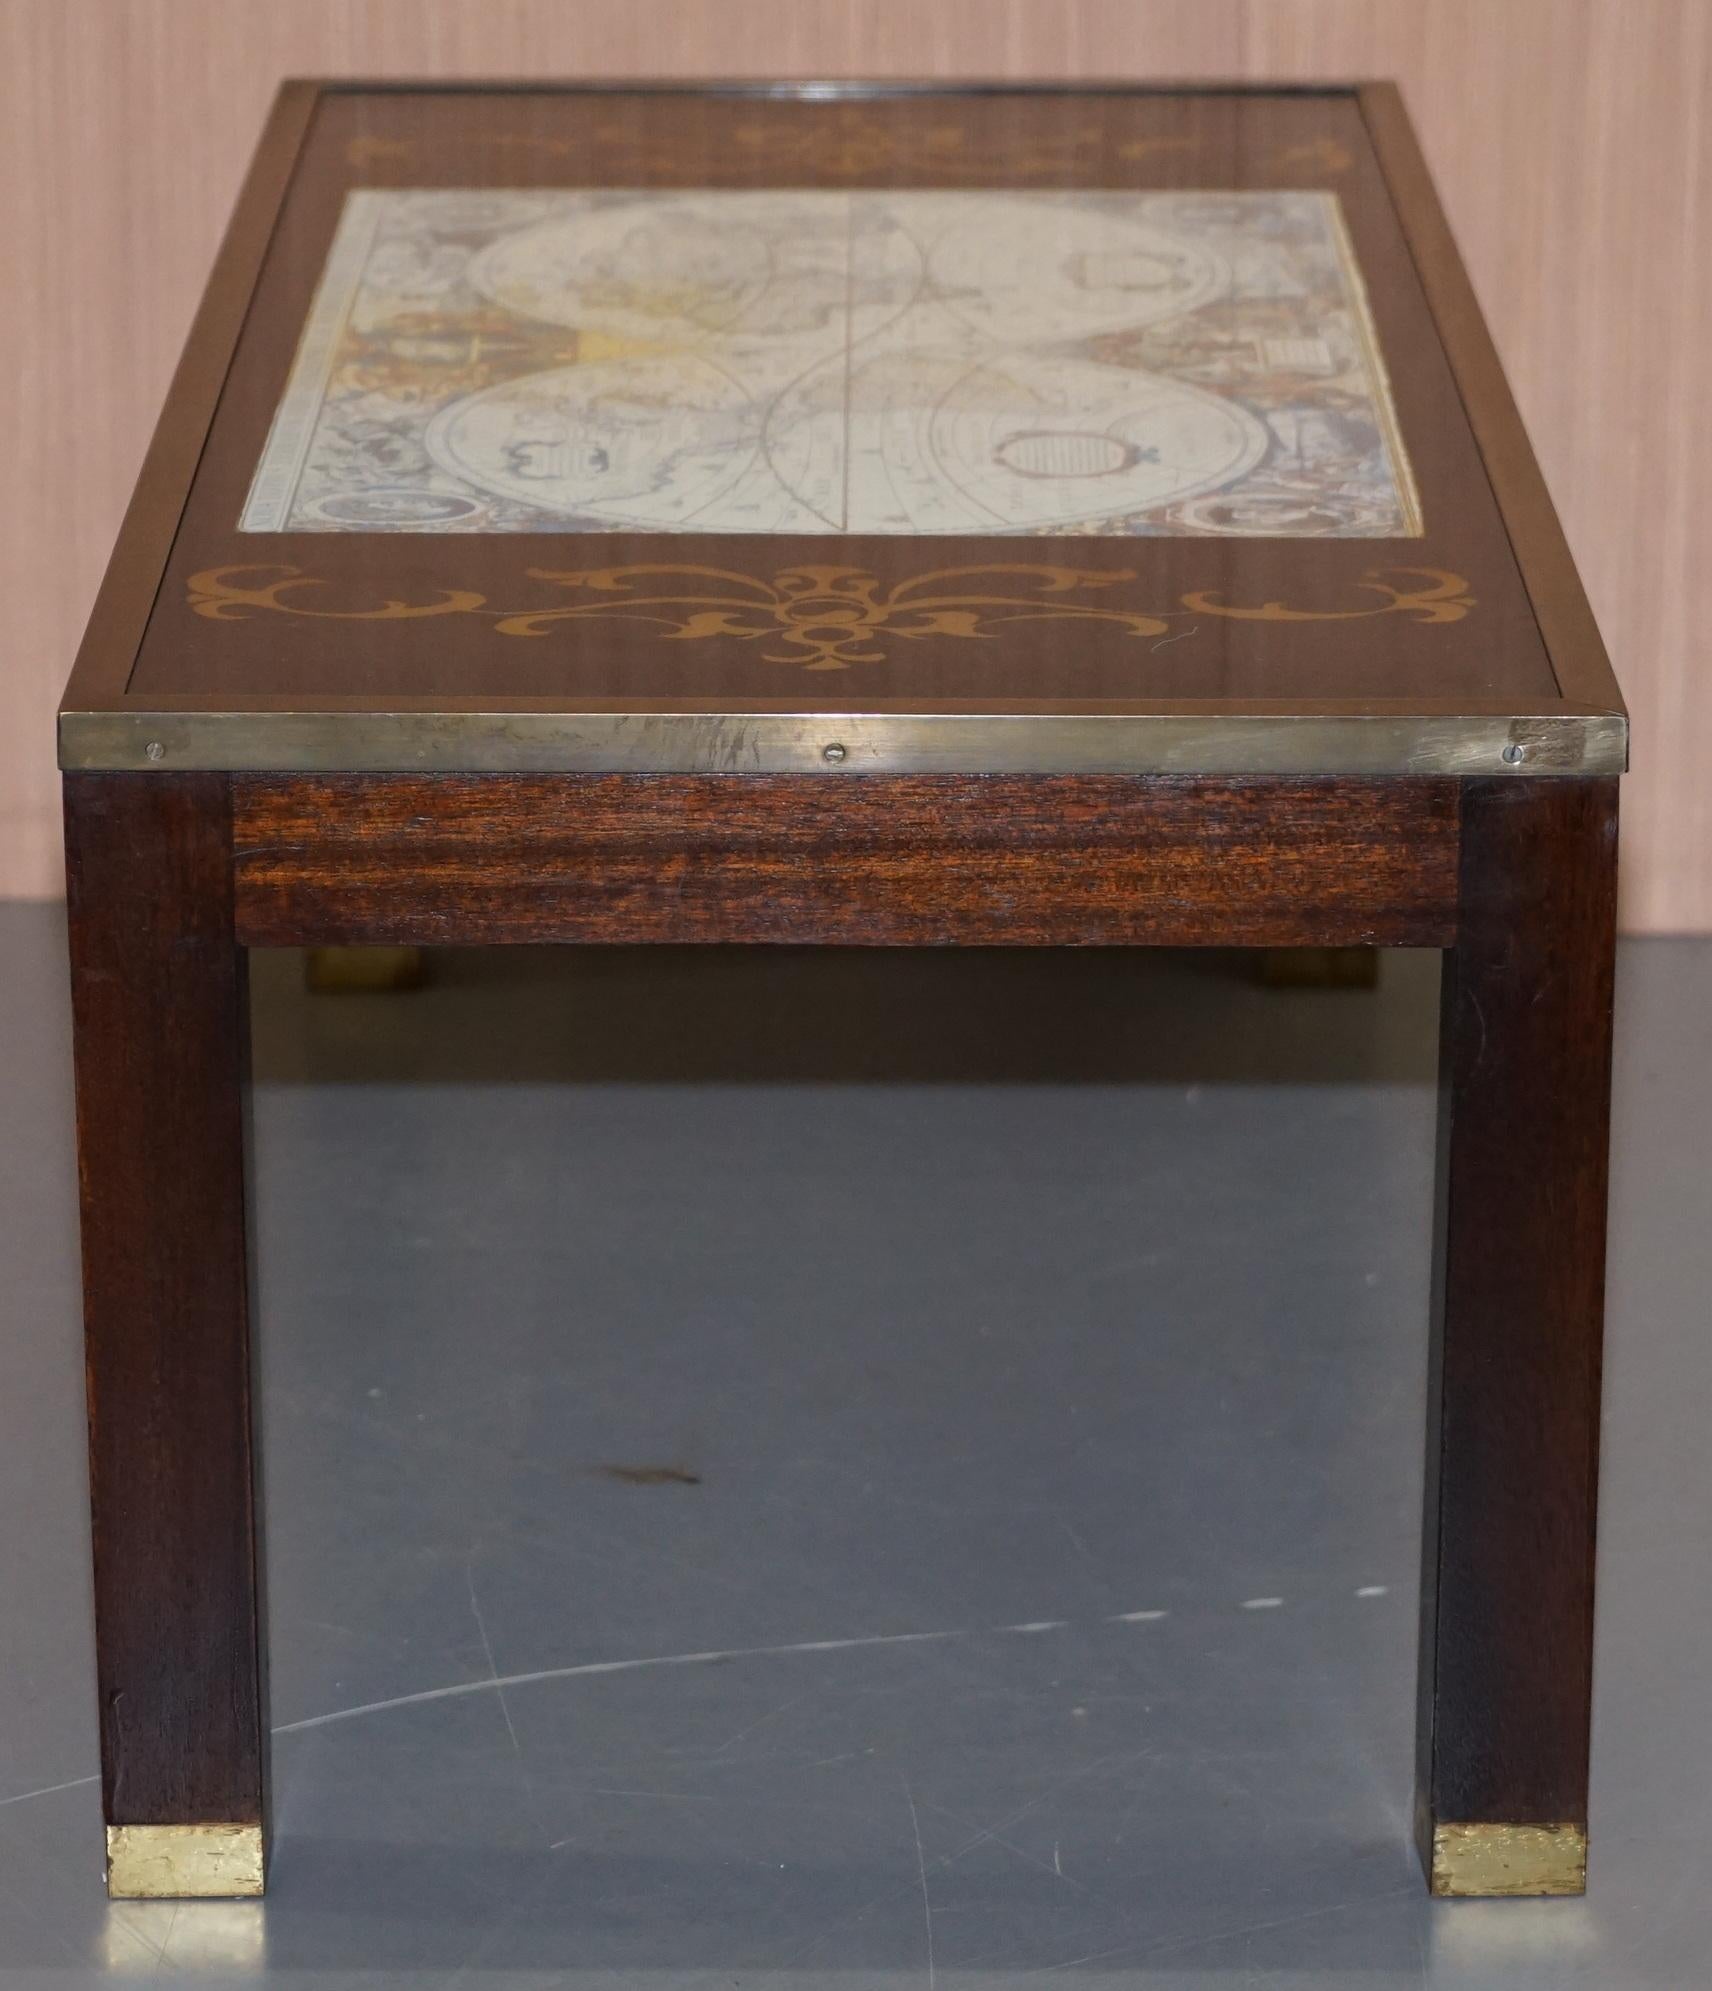 Hardwood Stunning Coffee and Side Table Nest of Tables Military Campaign with World Maps For Sale